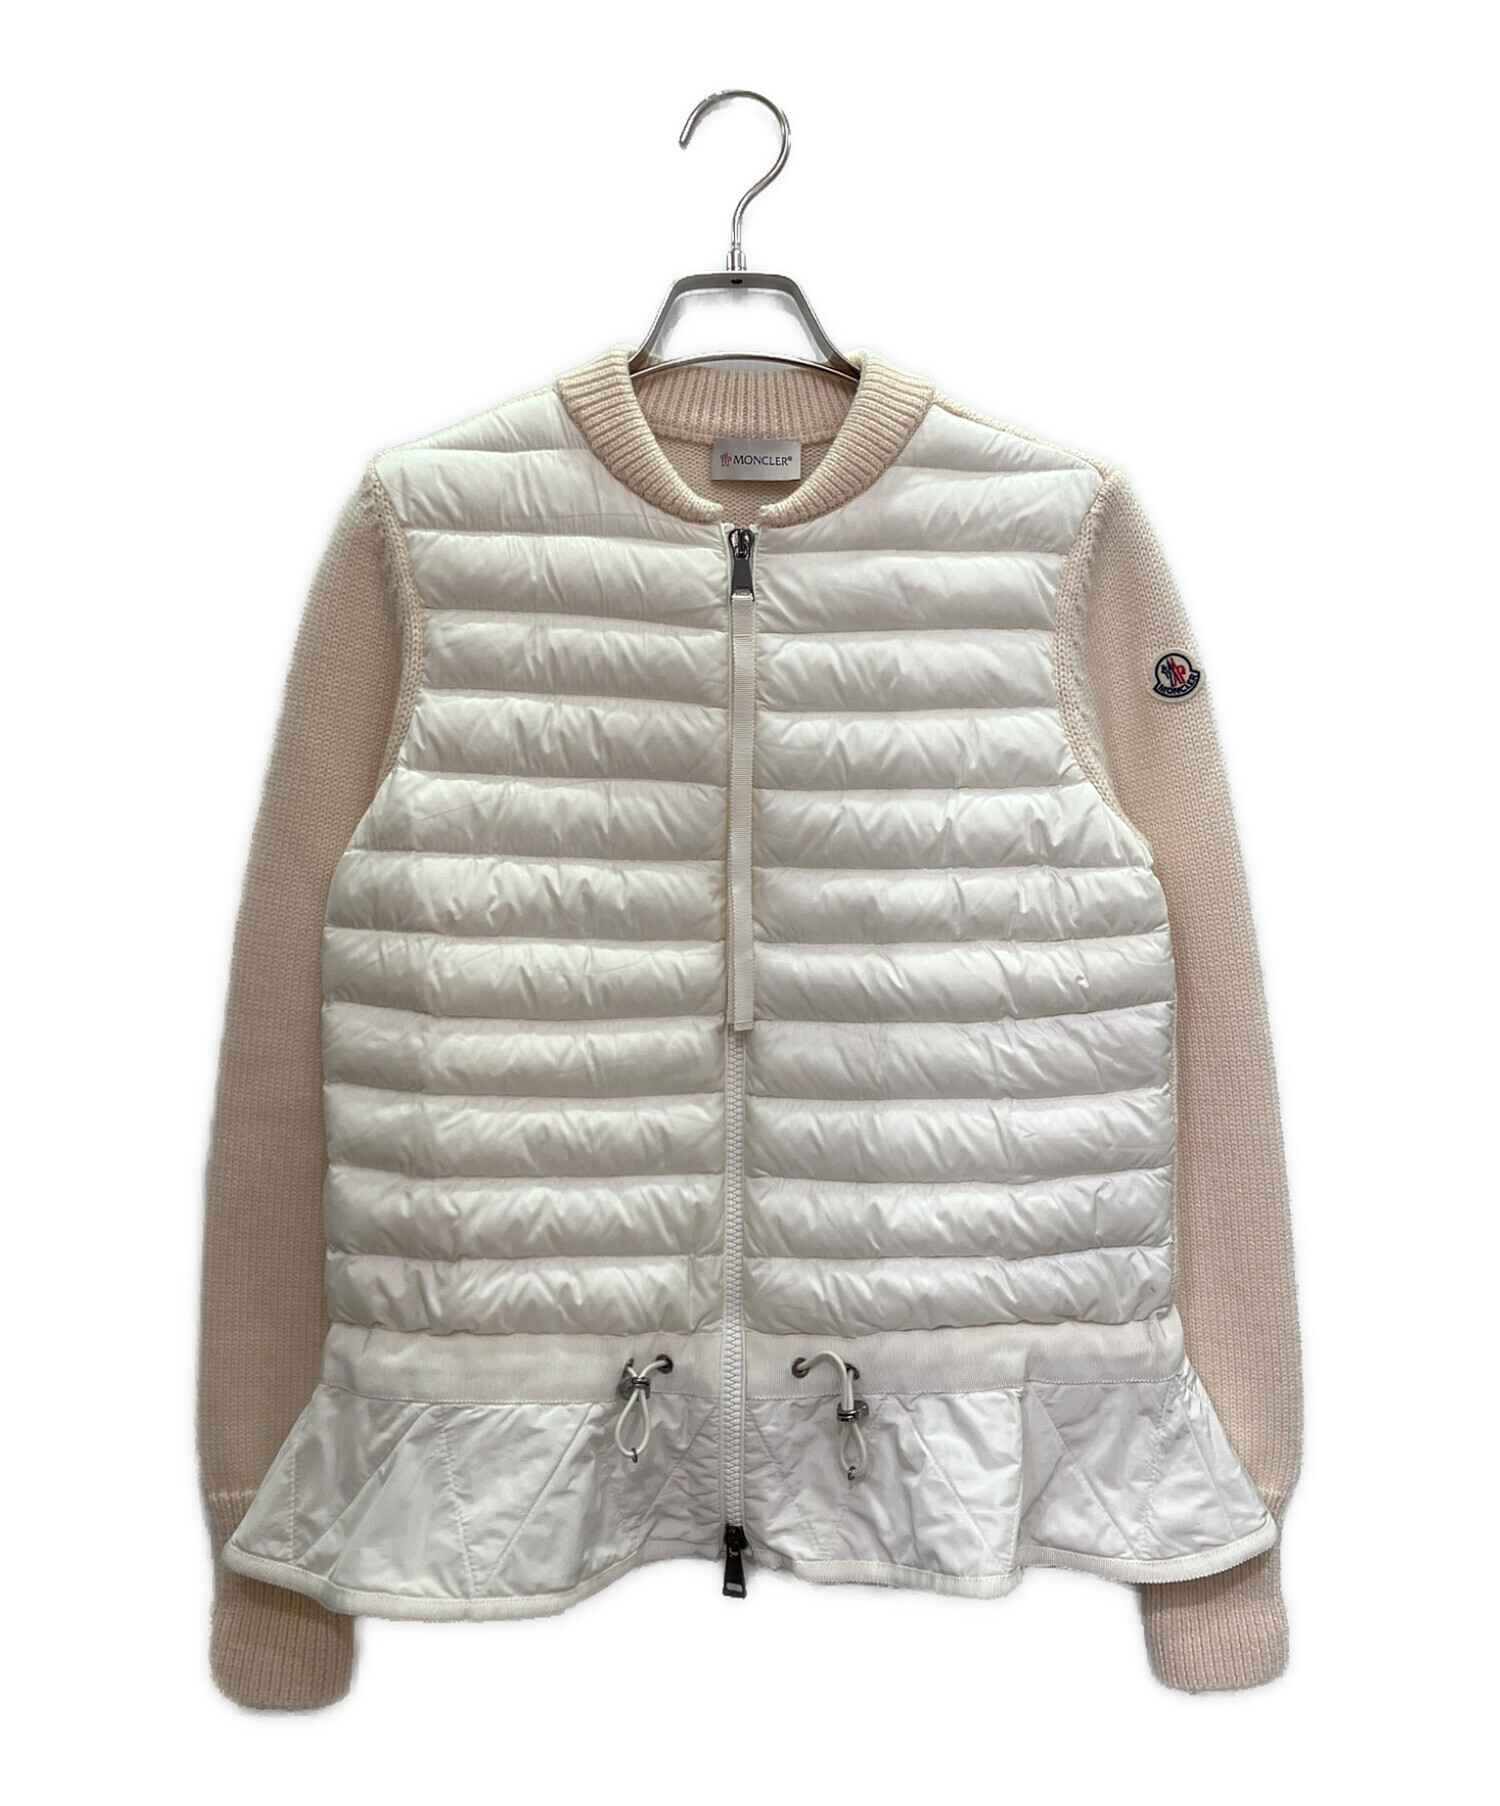 moncler maglione tricot cardigan送料もありますので